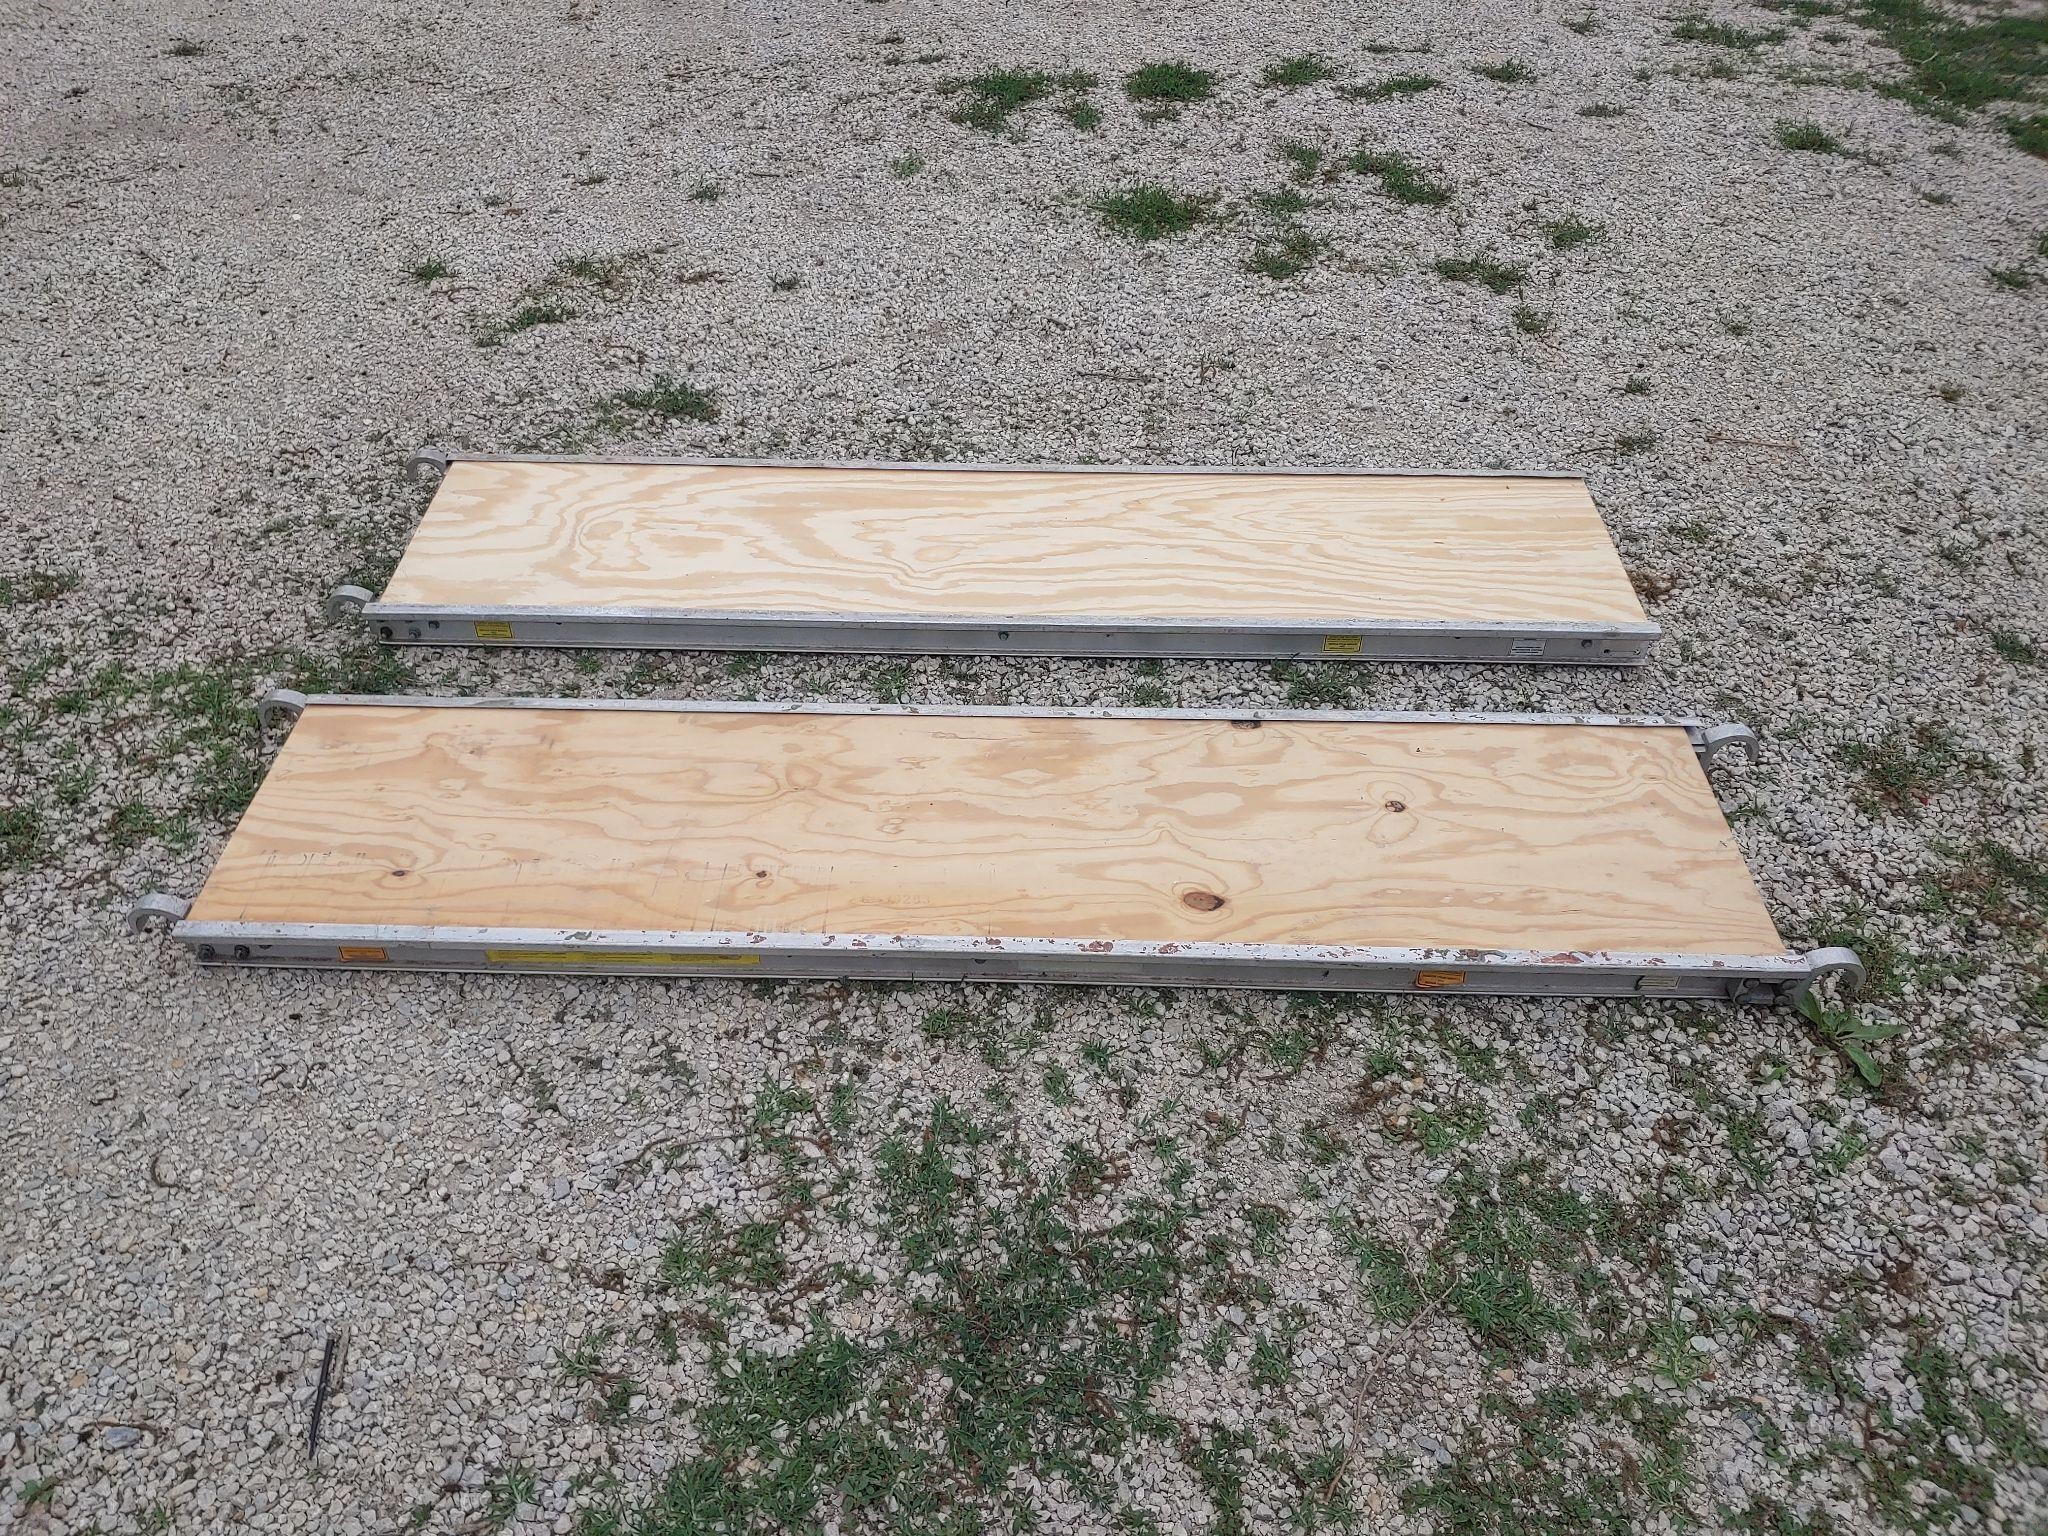 pair of 7ft Aluminum / Plywood Scaffolding Planks